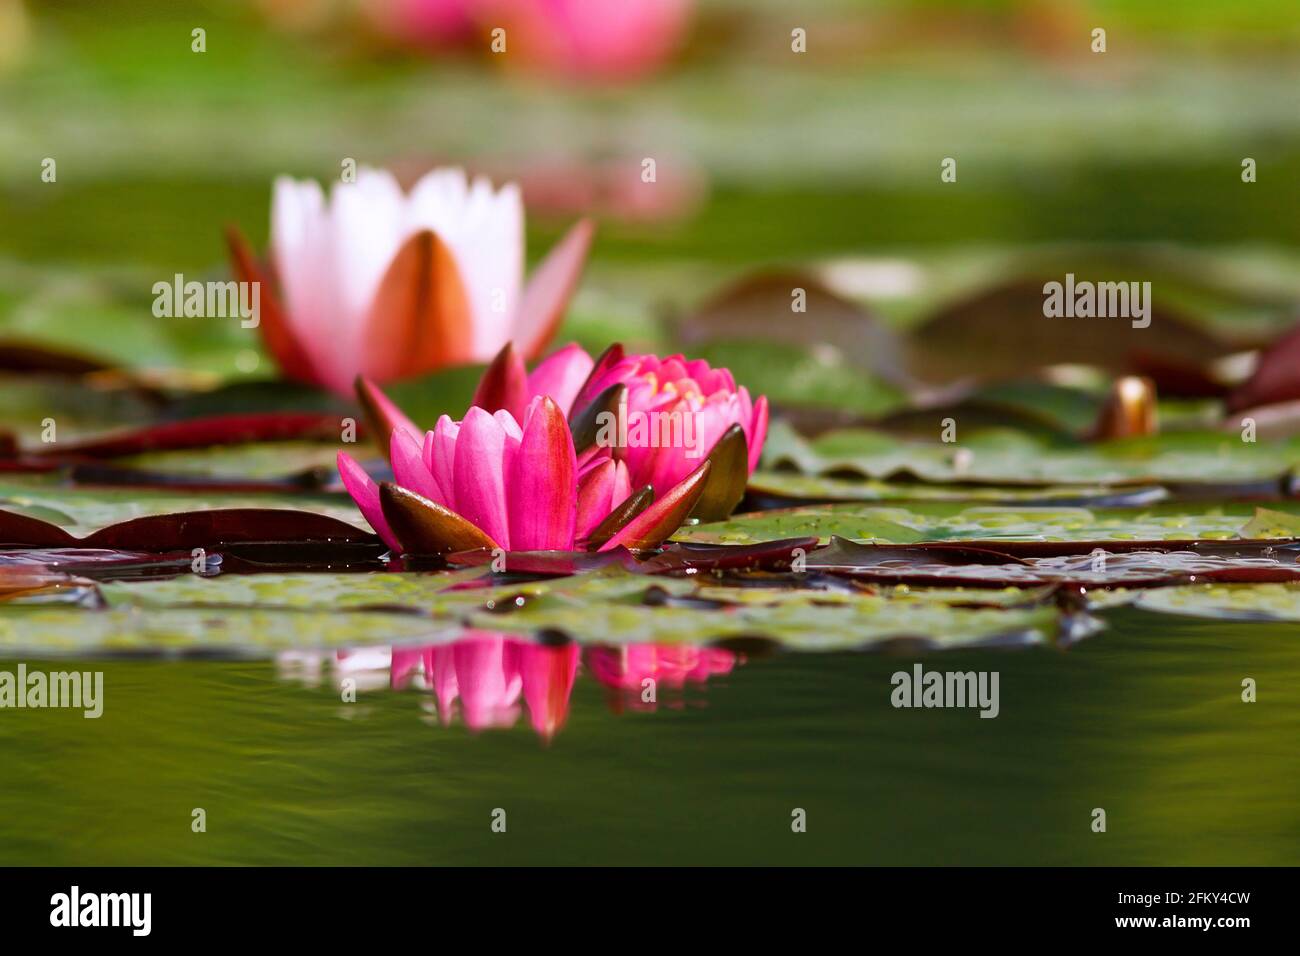 pink water lily on pond, colorful plant in full bloom Stock Photo